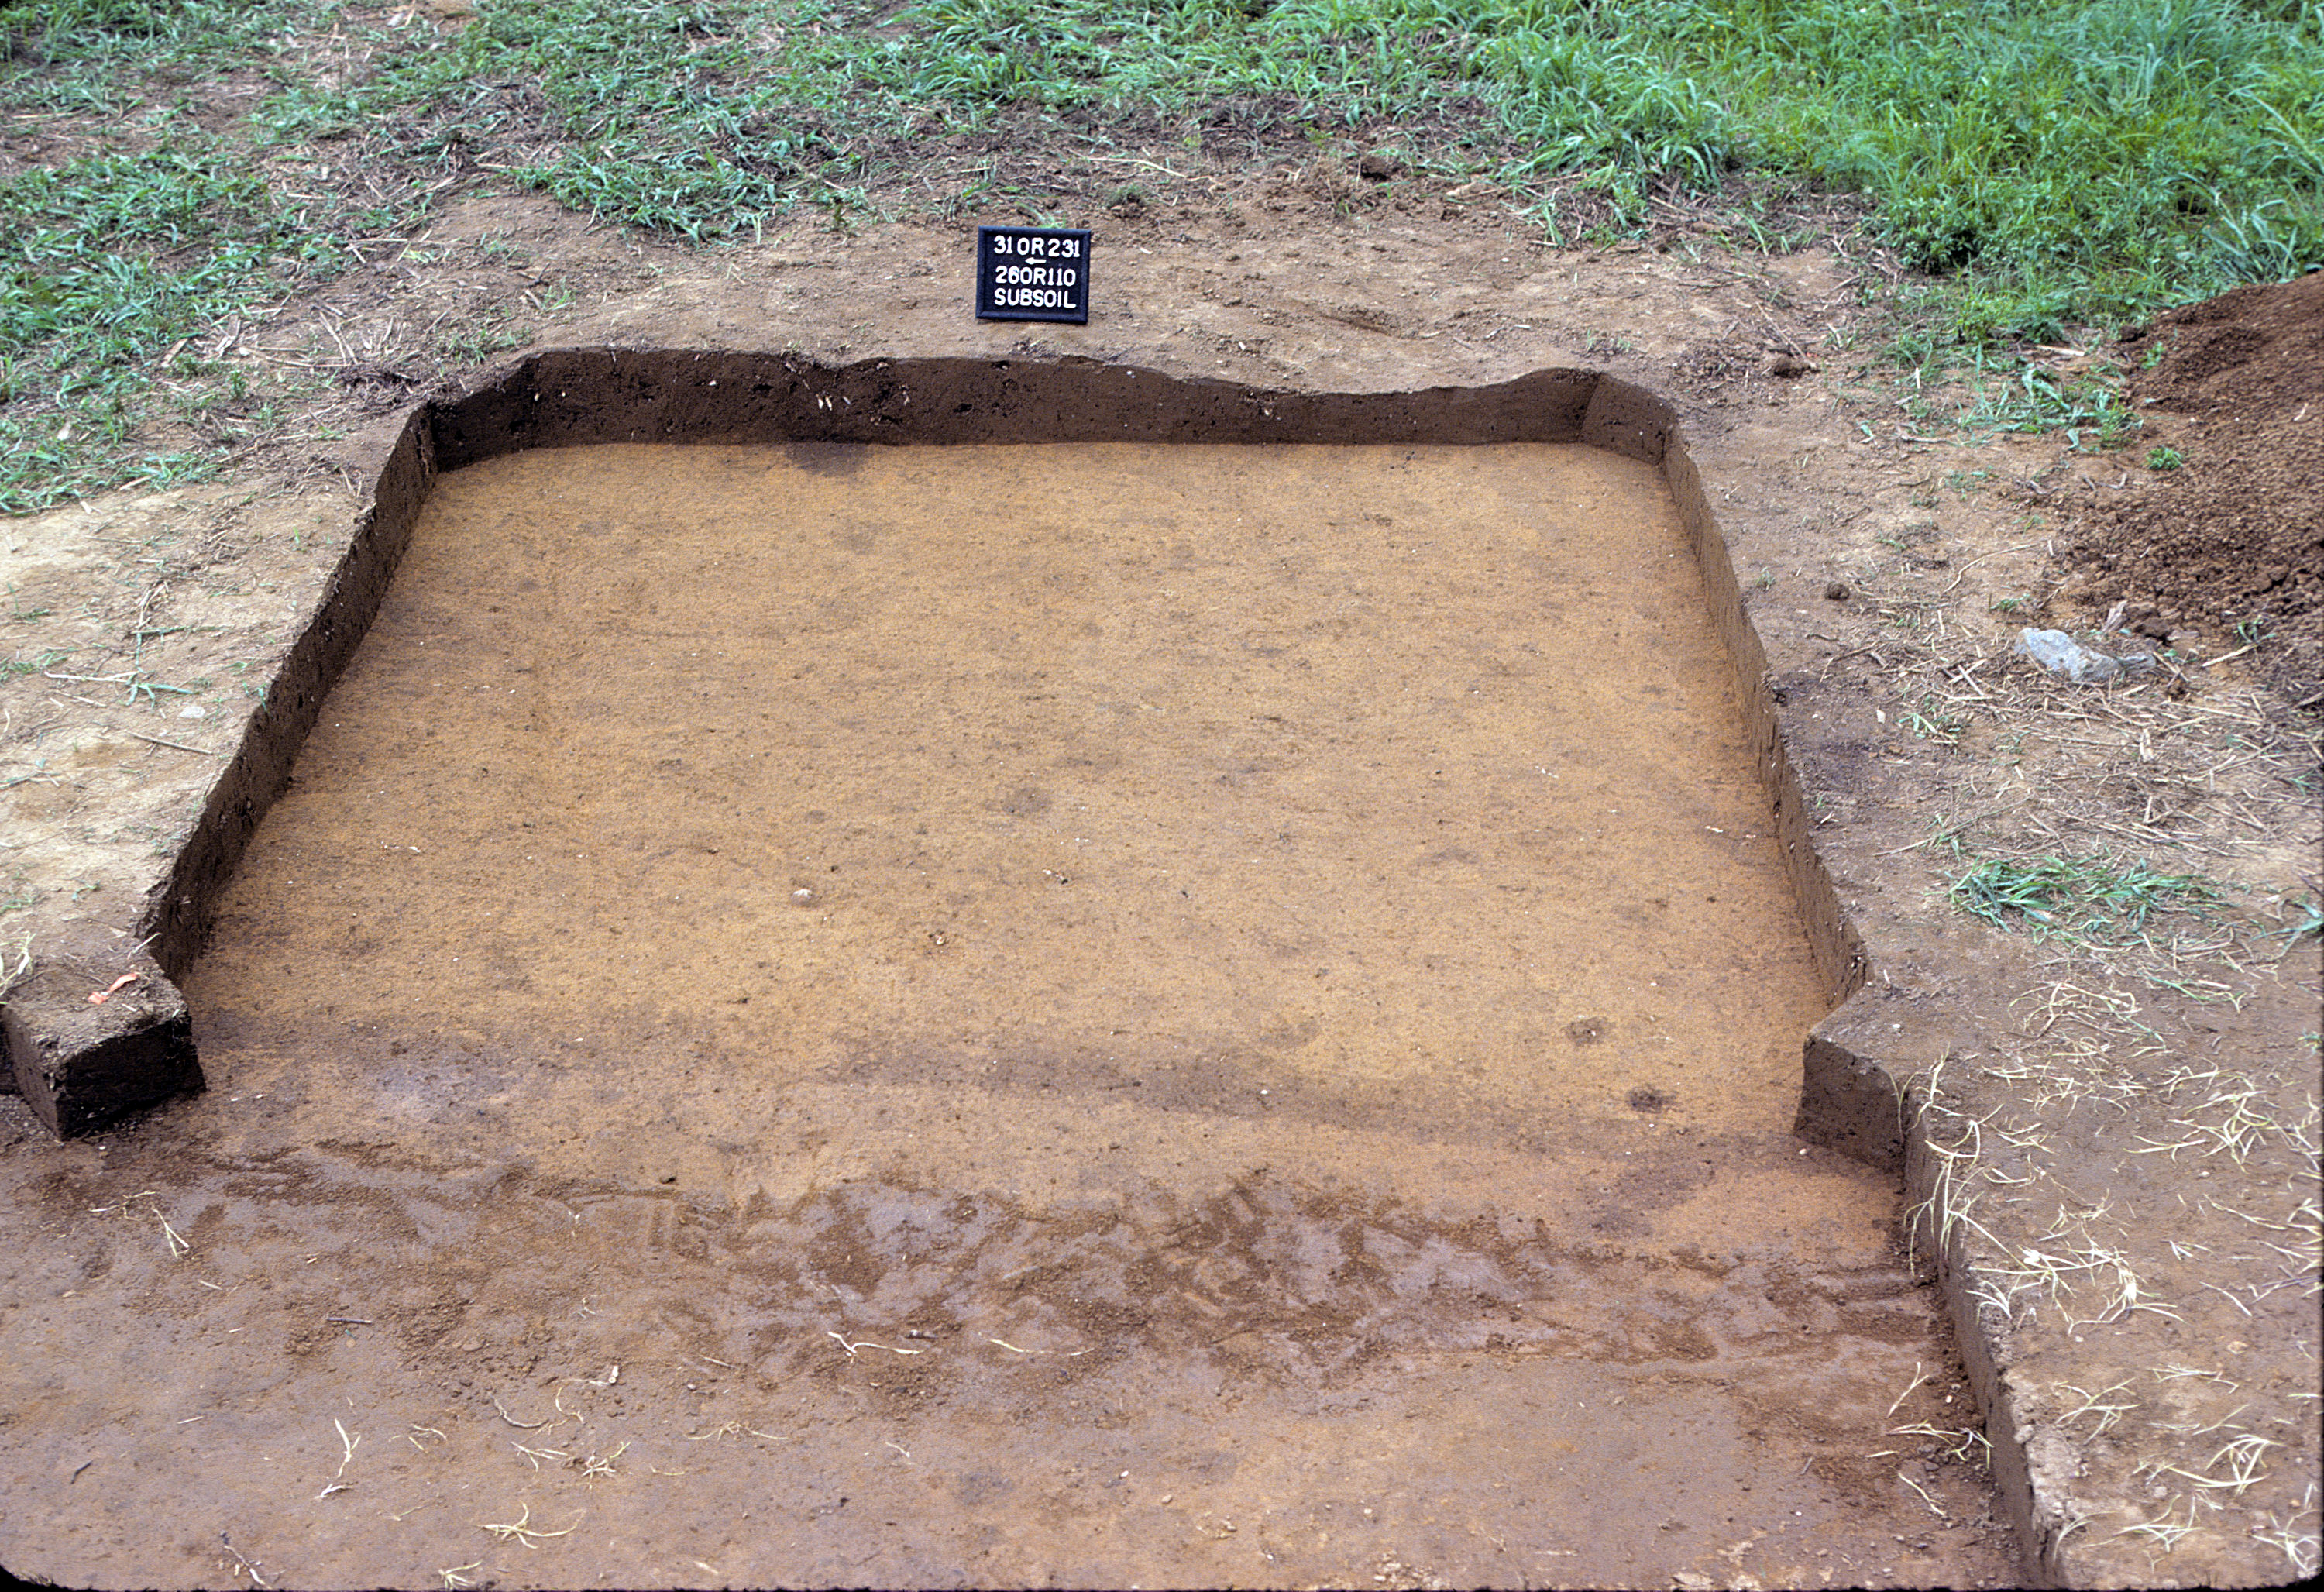 Figure 901. Sq. 260R110 at top of subsoil (view to east).